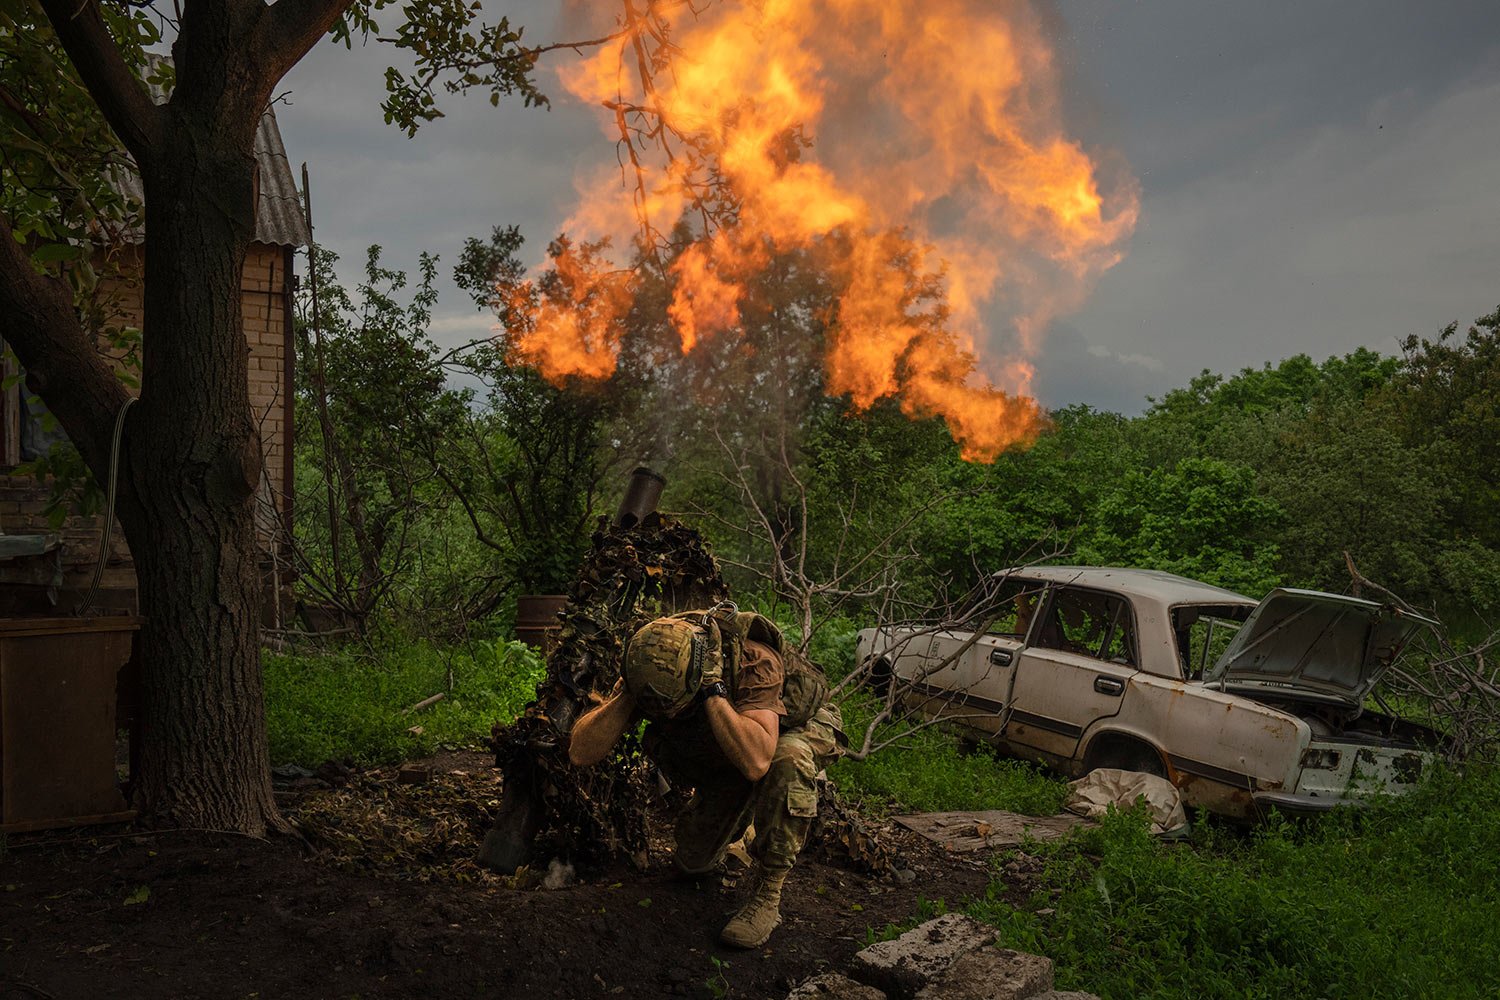  A Ukrainian soldier fires a mortar at Russian positions on the front line near Bakhmut, Ukraine, Sunday, May 28, 2023. (AP Photo/Efrem Lukatsky) 